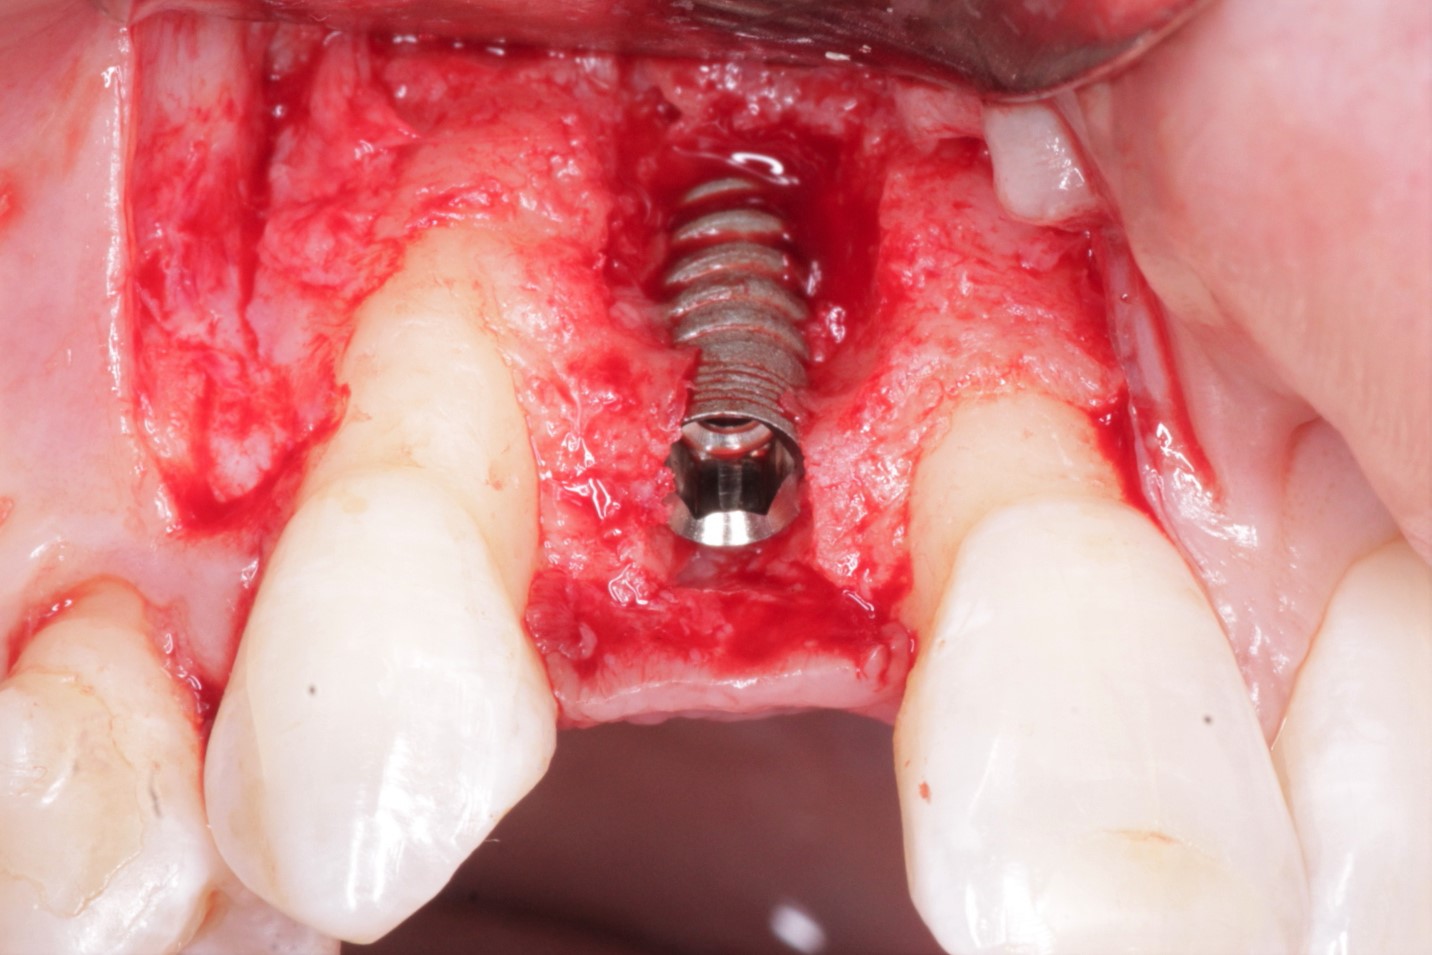 Grafting around implant at time of placement: predictable?